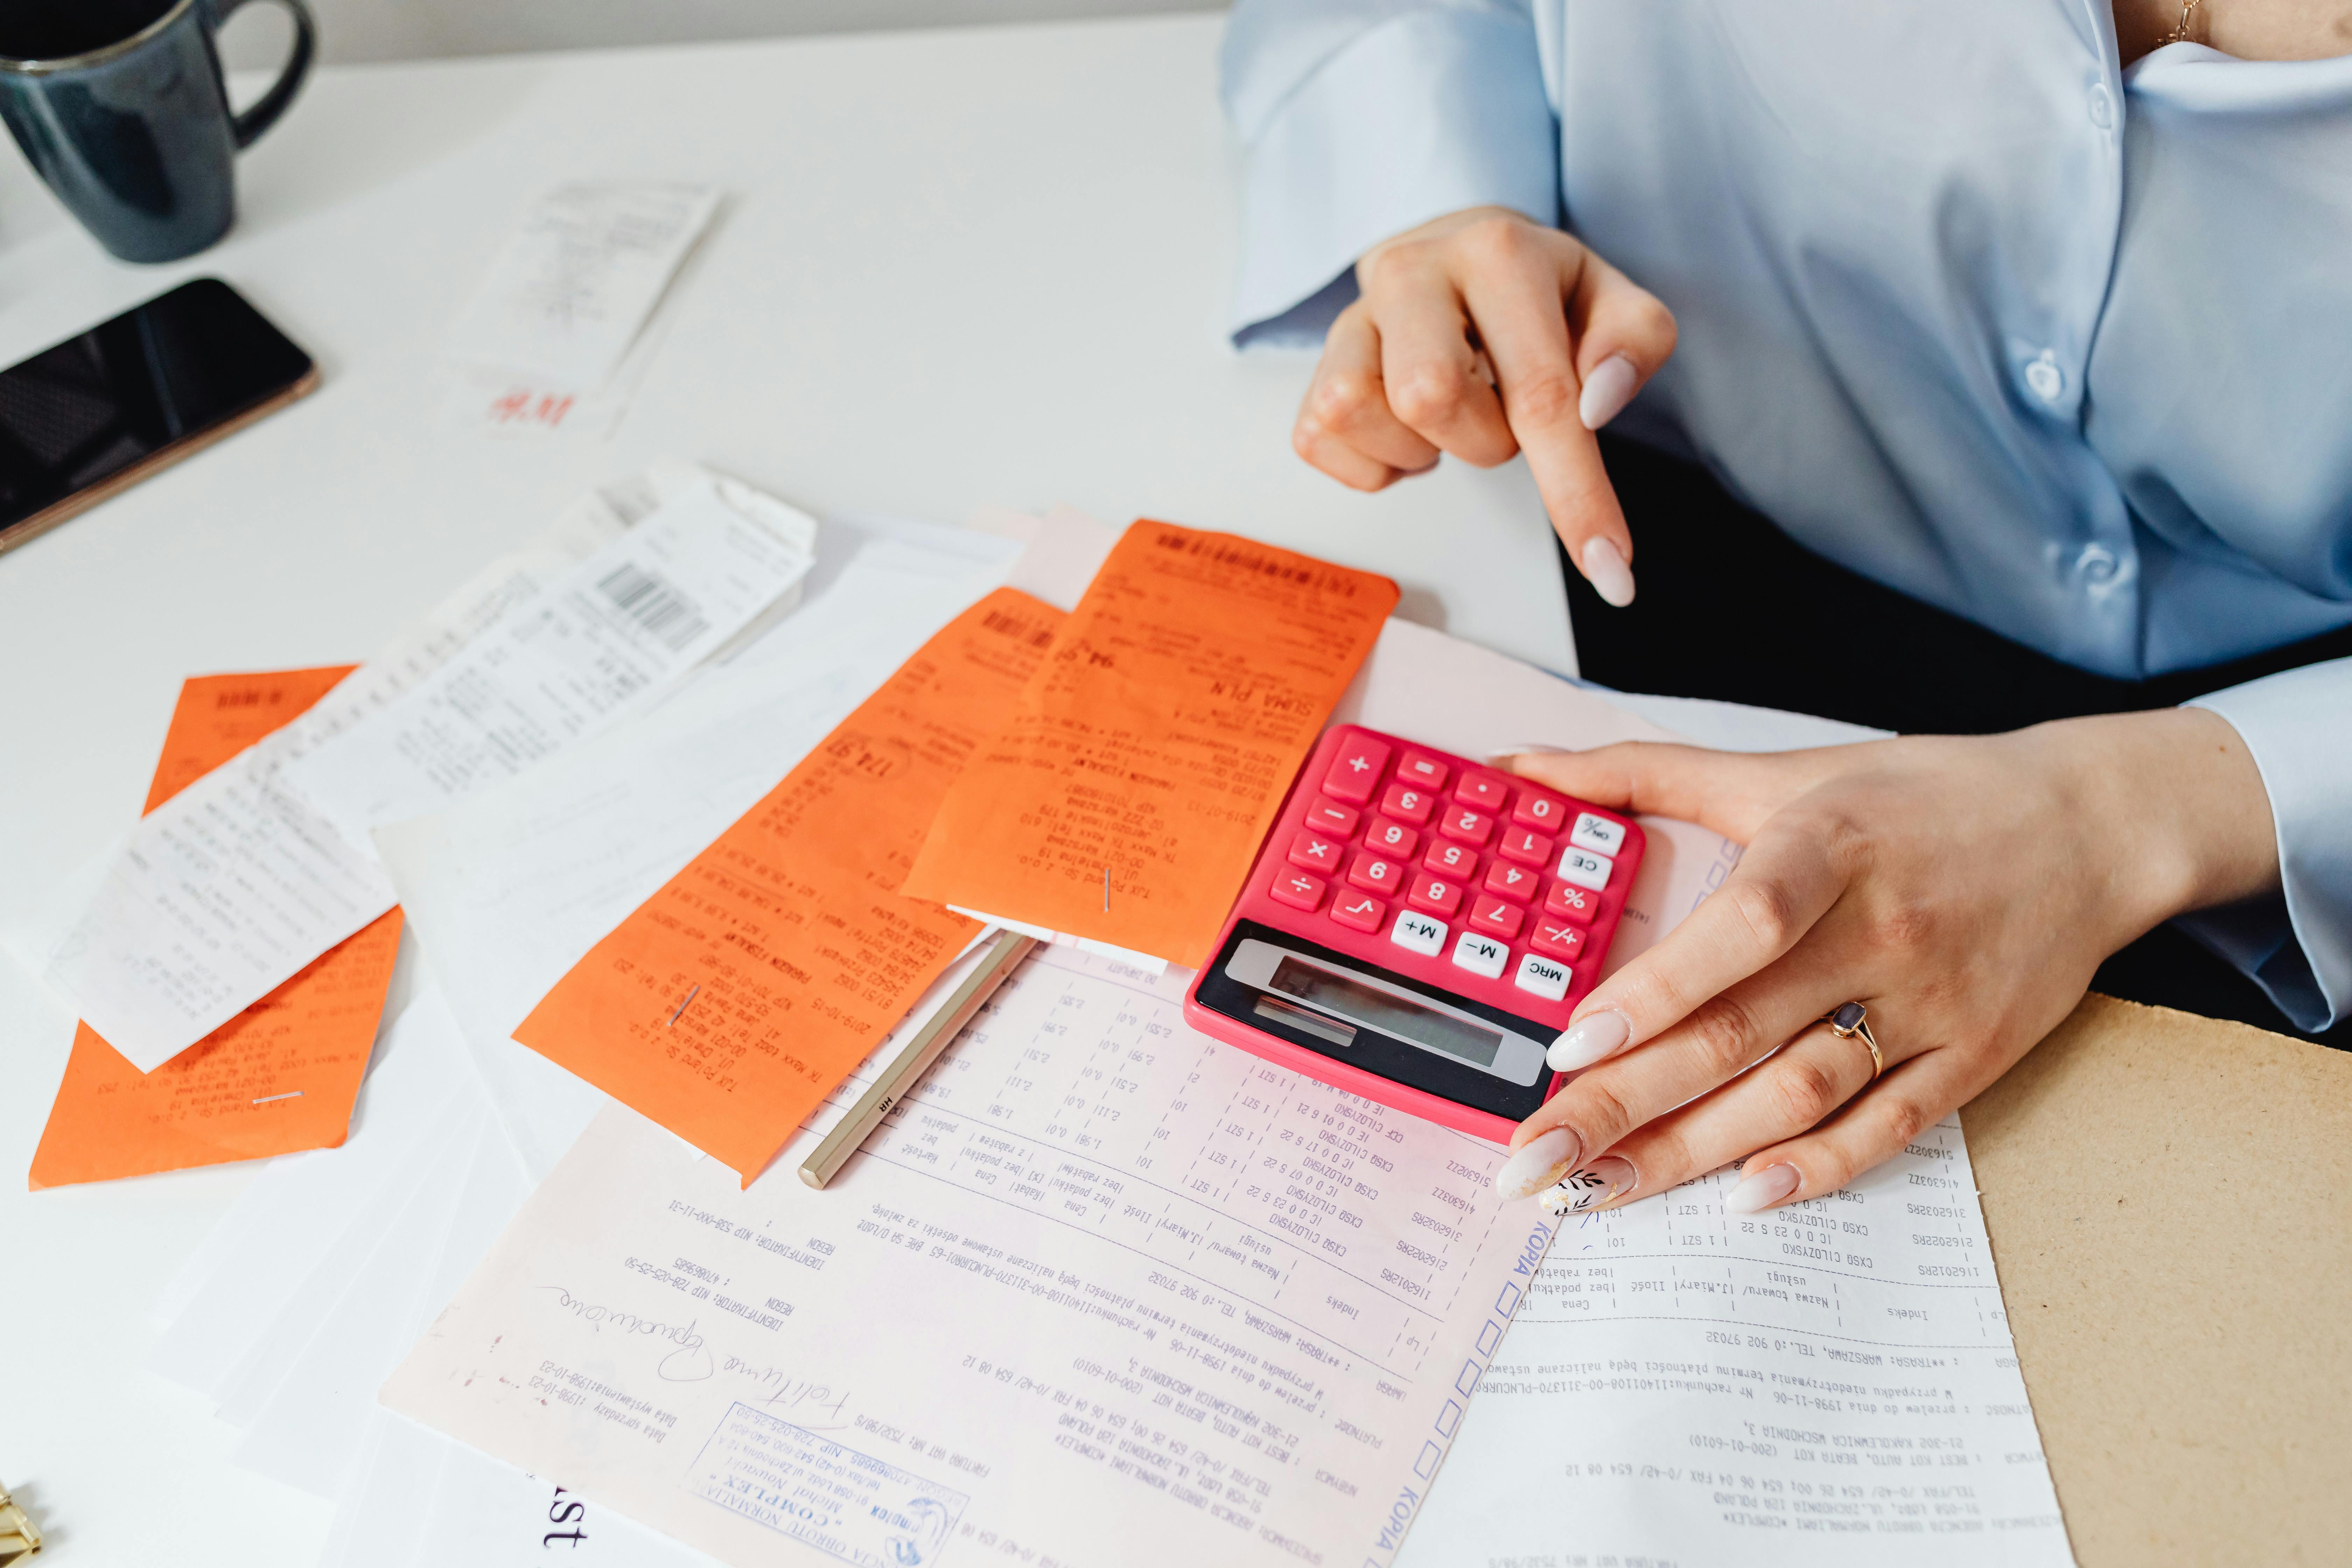 Receipts on the table | Source: Pexels